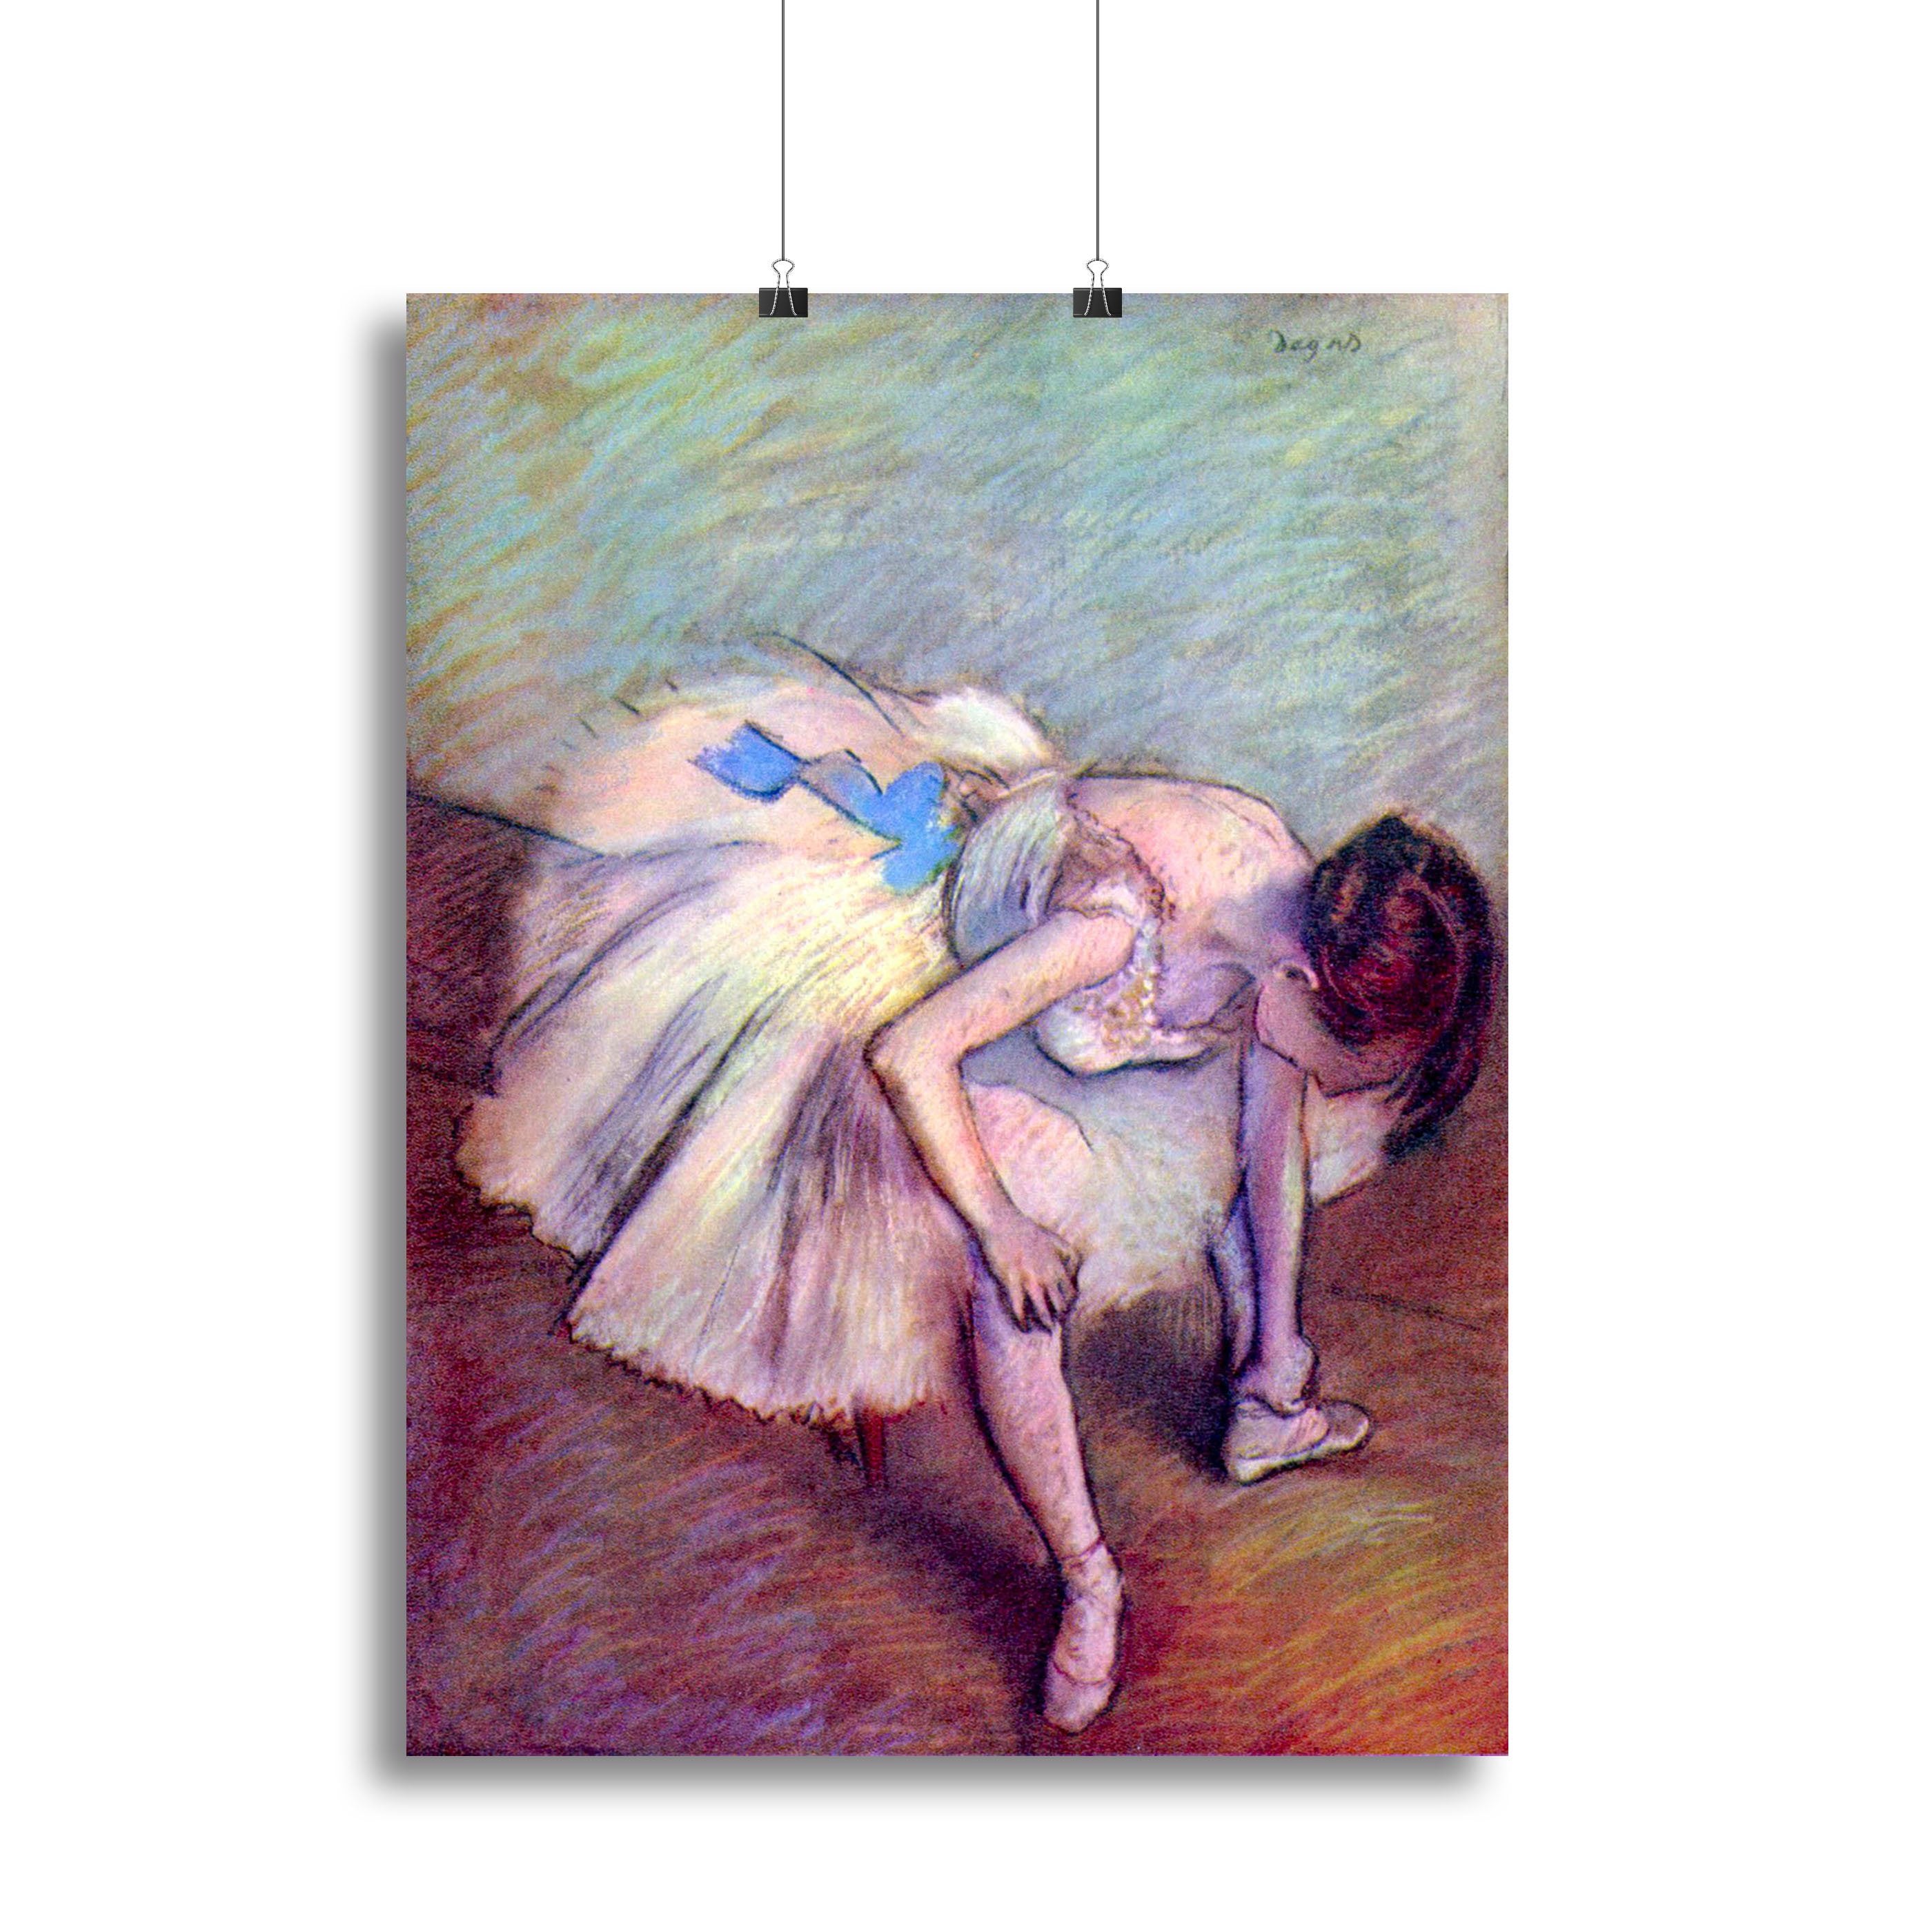 Dancer 2 by Degas Canvas Print or Poster